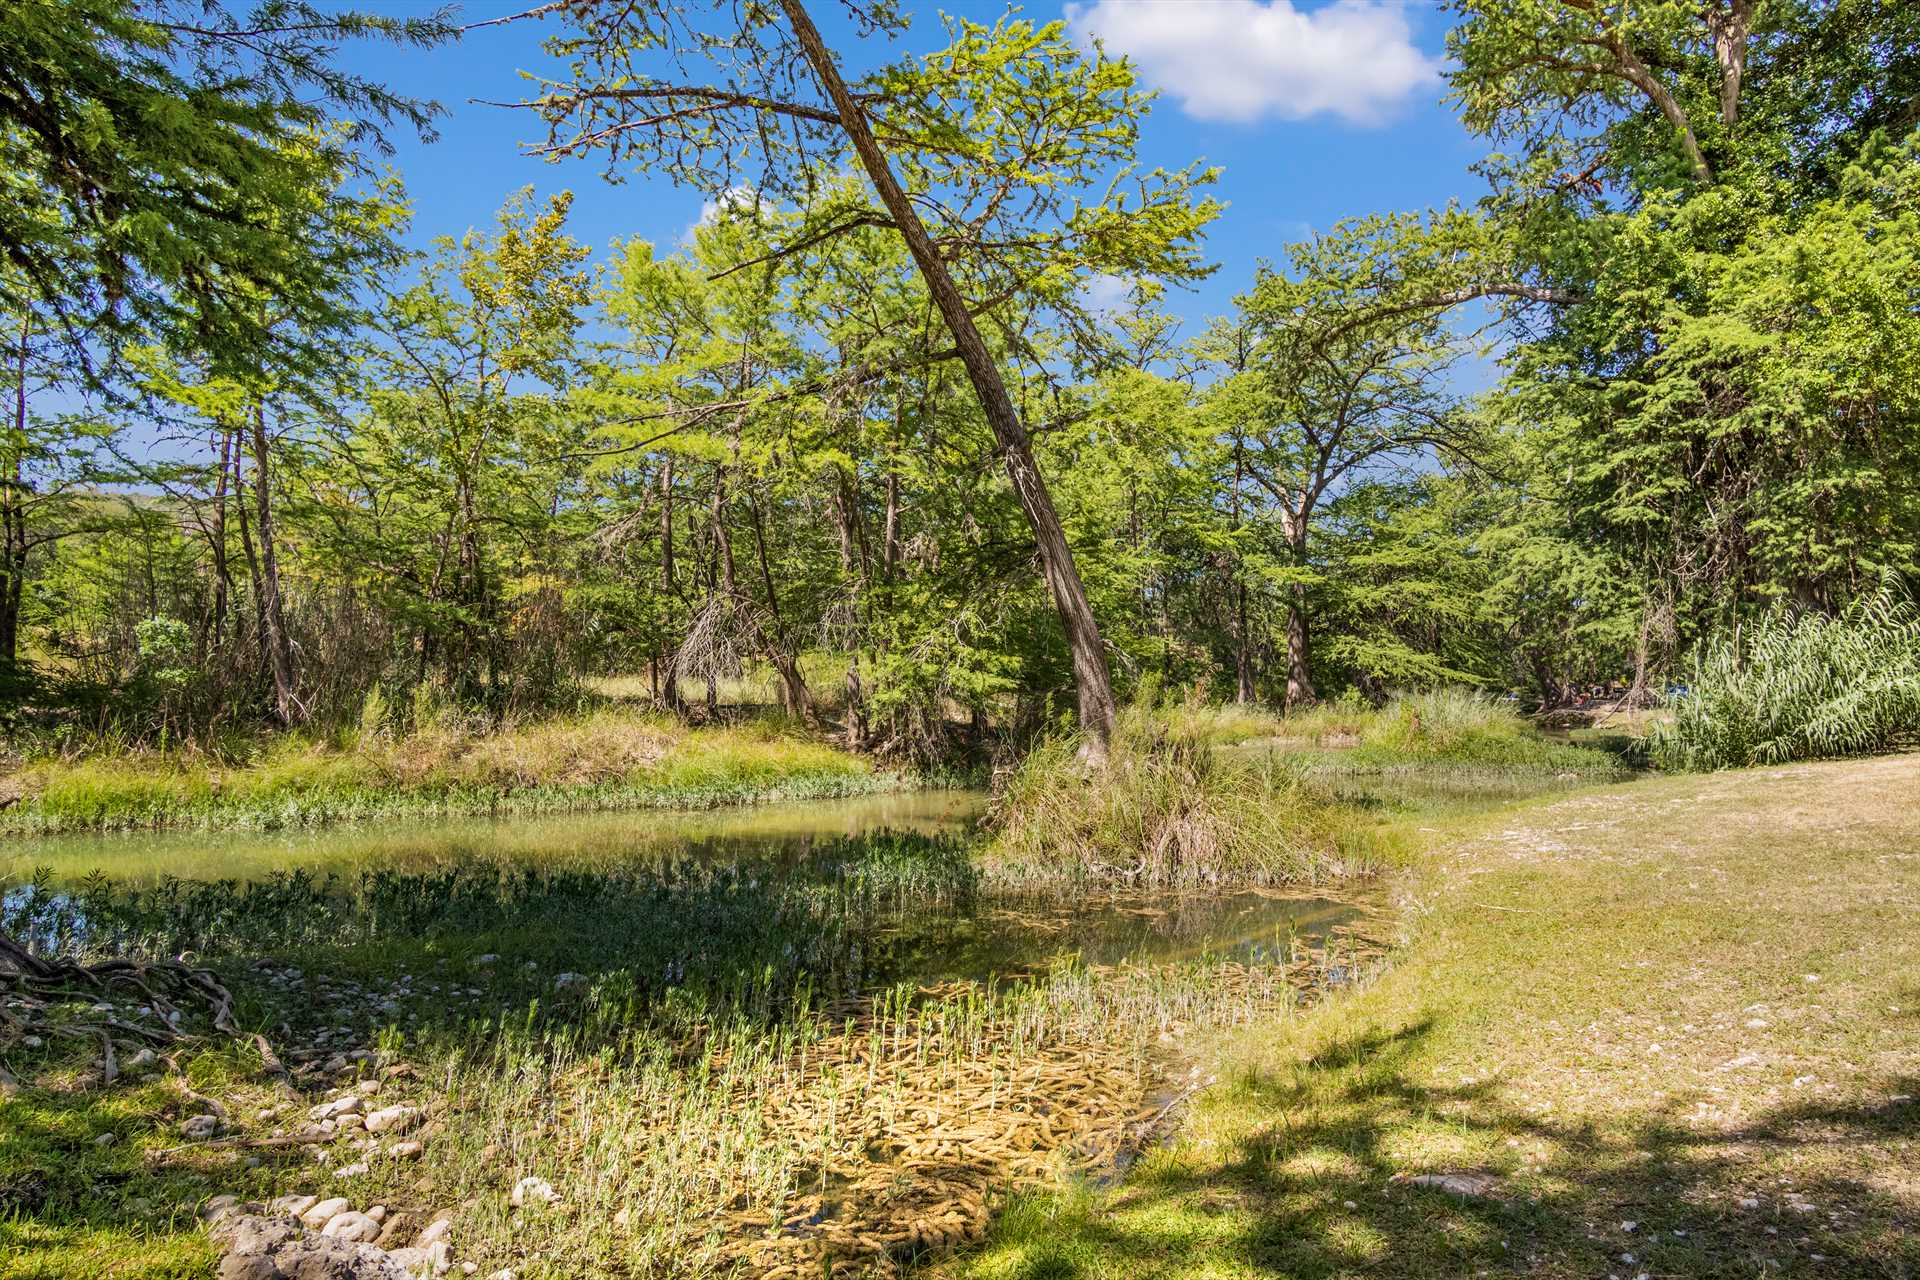                                                 Easy access to the Guadalupe River is yours to enjoy! There's also a tubing shoot to an island nearby.